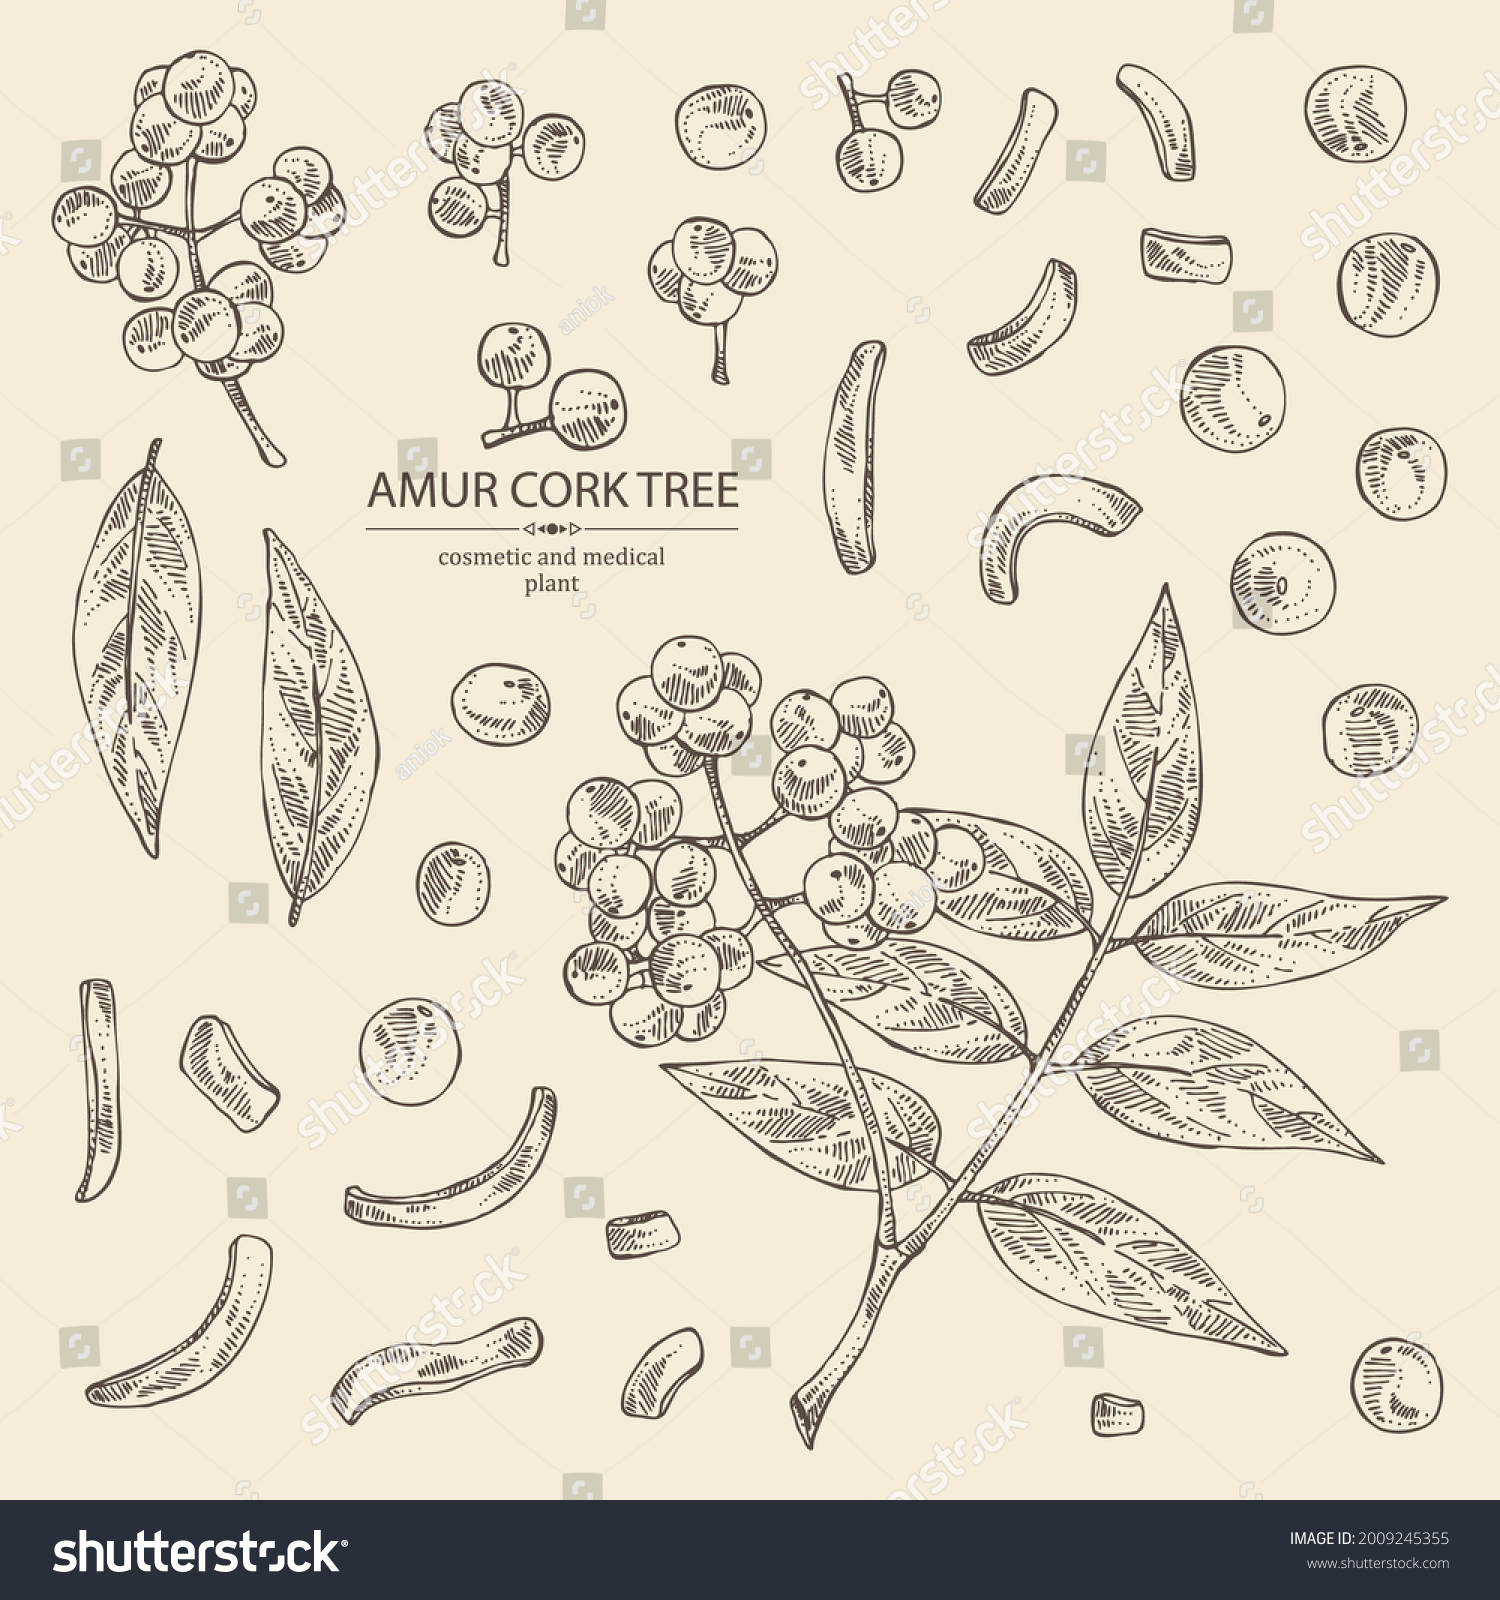 SVG of Collection of amur cork tree: amur cork berries, plant and amur cork tree bark. Phellodendron amurense. Cosmetic and medical plant. Vector hand drawn illustration svg